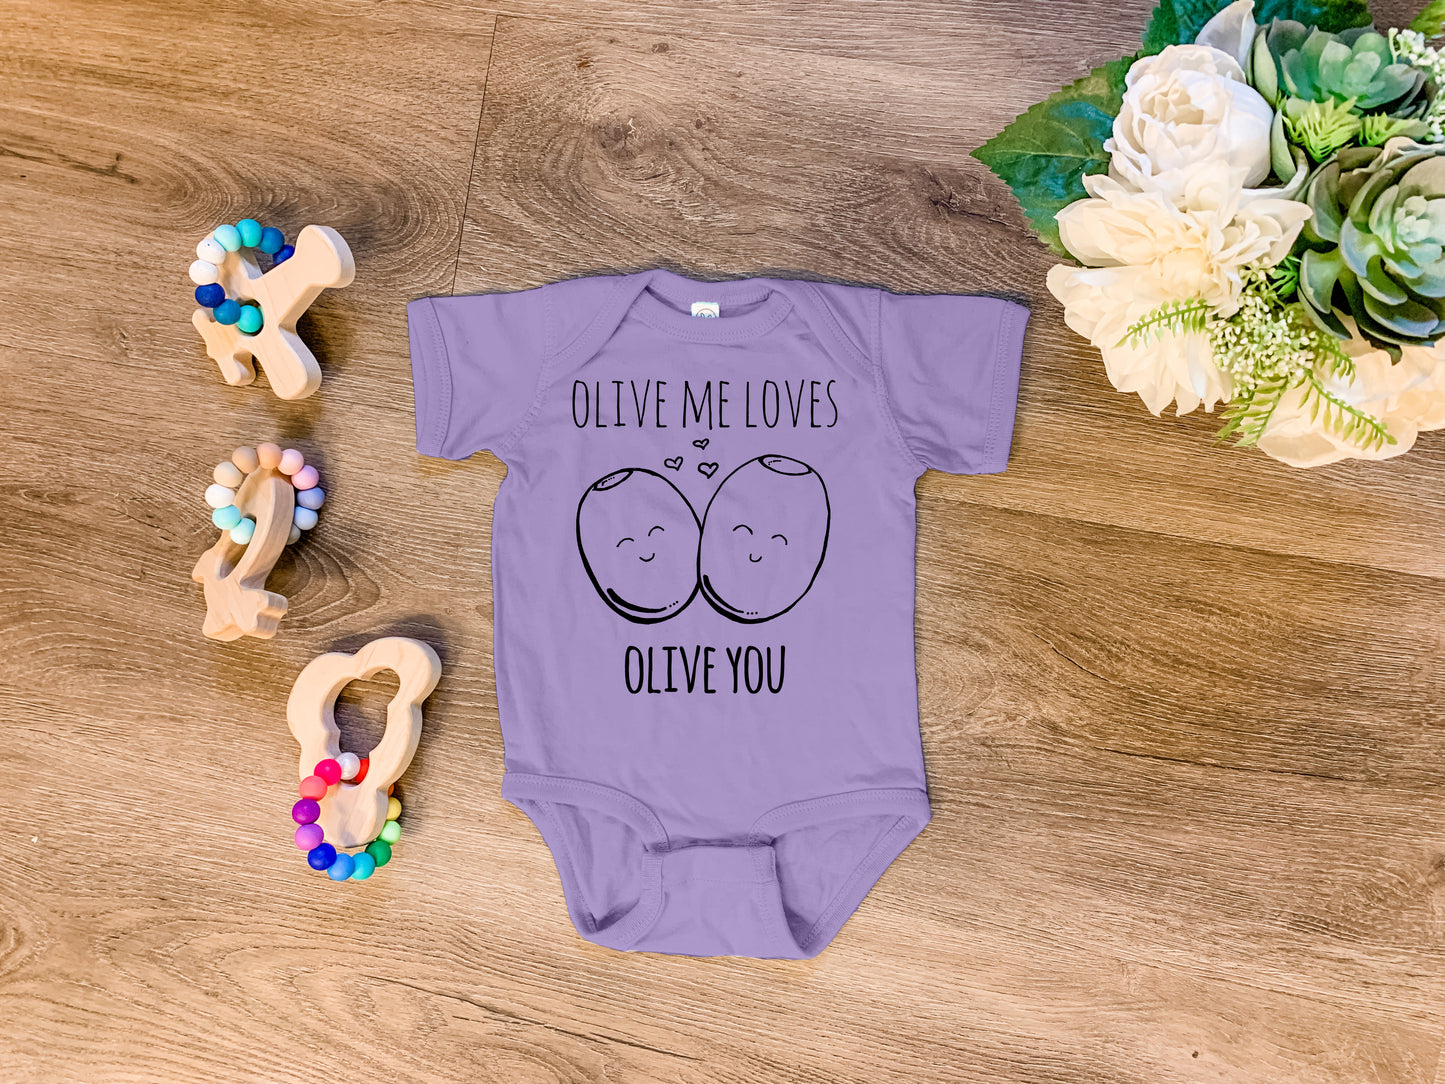 Olive Me Loves Olive You - Onesie - Heather Gray, Chill, or Lavender